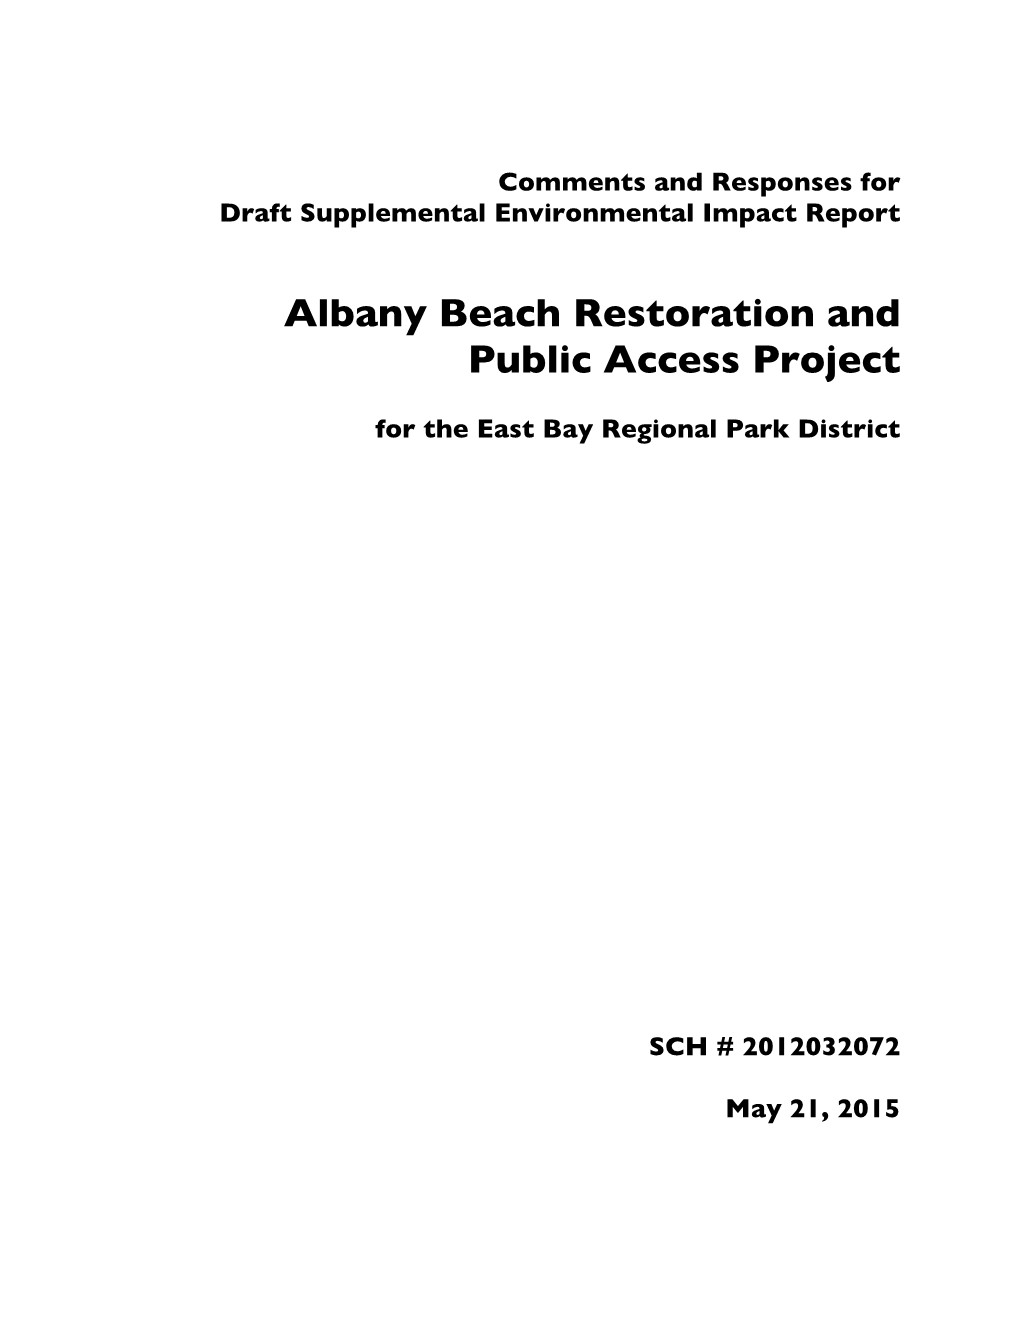 Albany Beach Restoration and Public Access Project